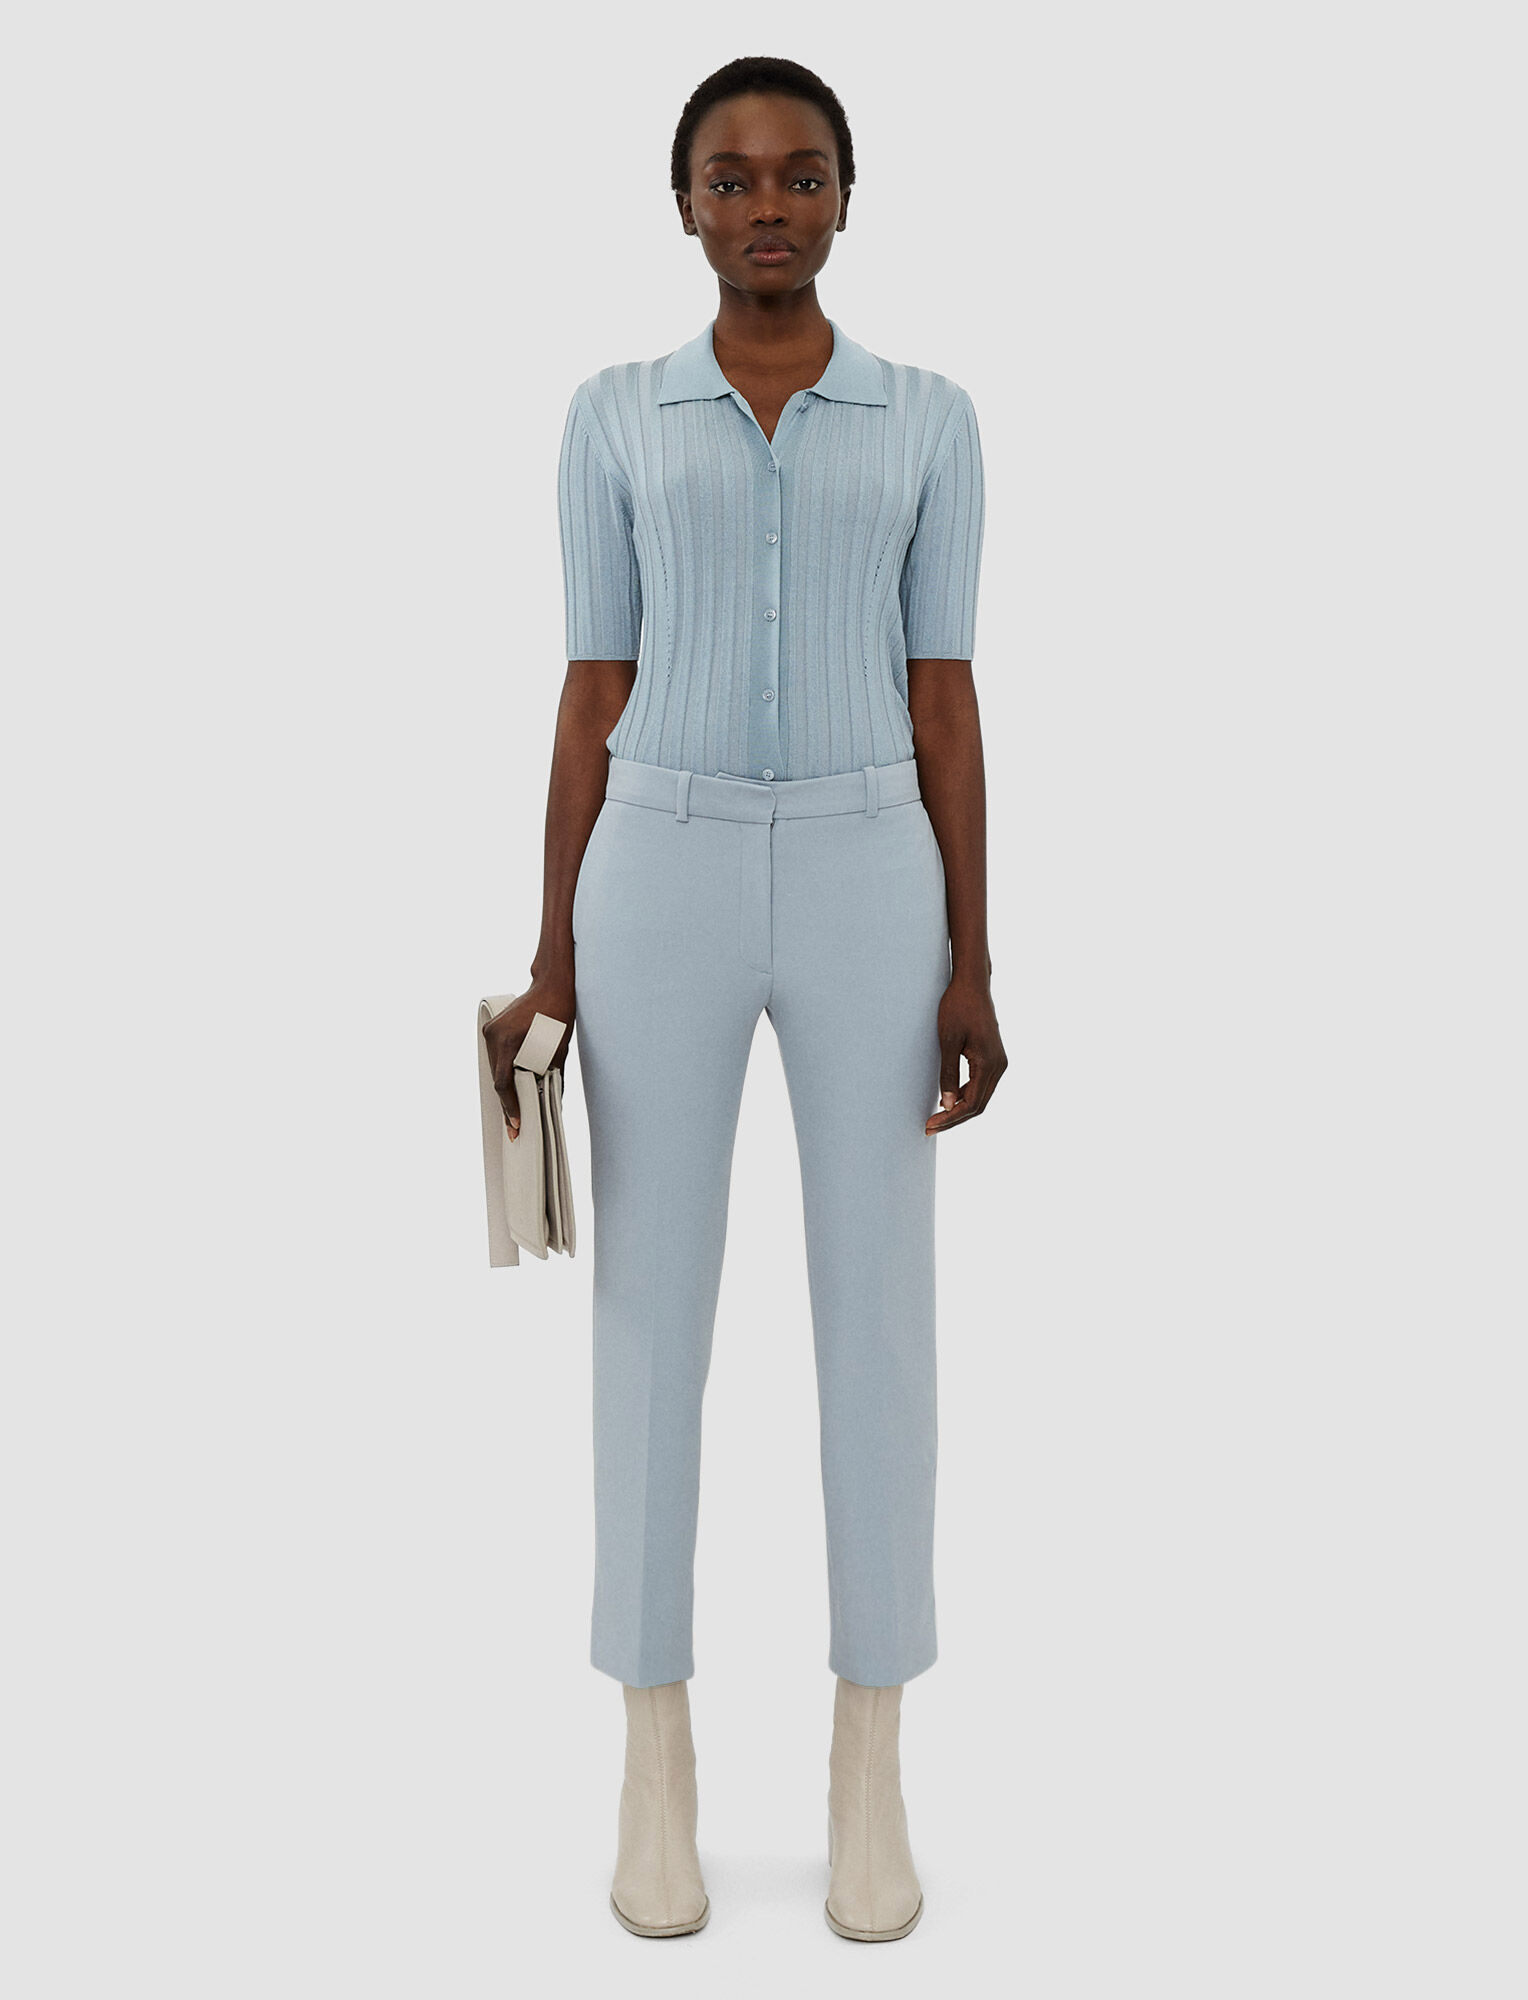 Joseph, Toile Stretch Bing Court Trousers, in Dusty Blue